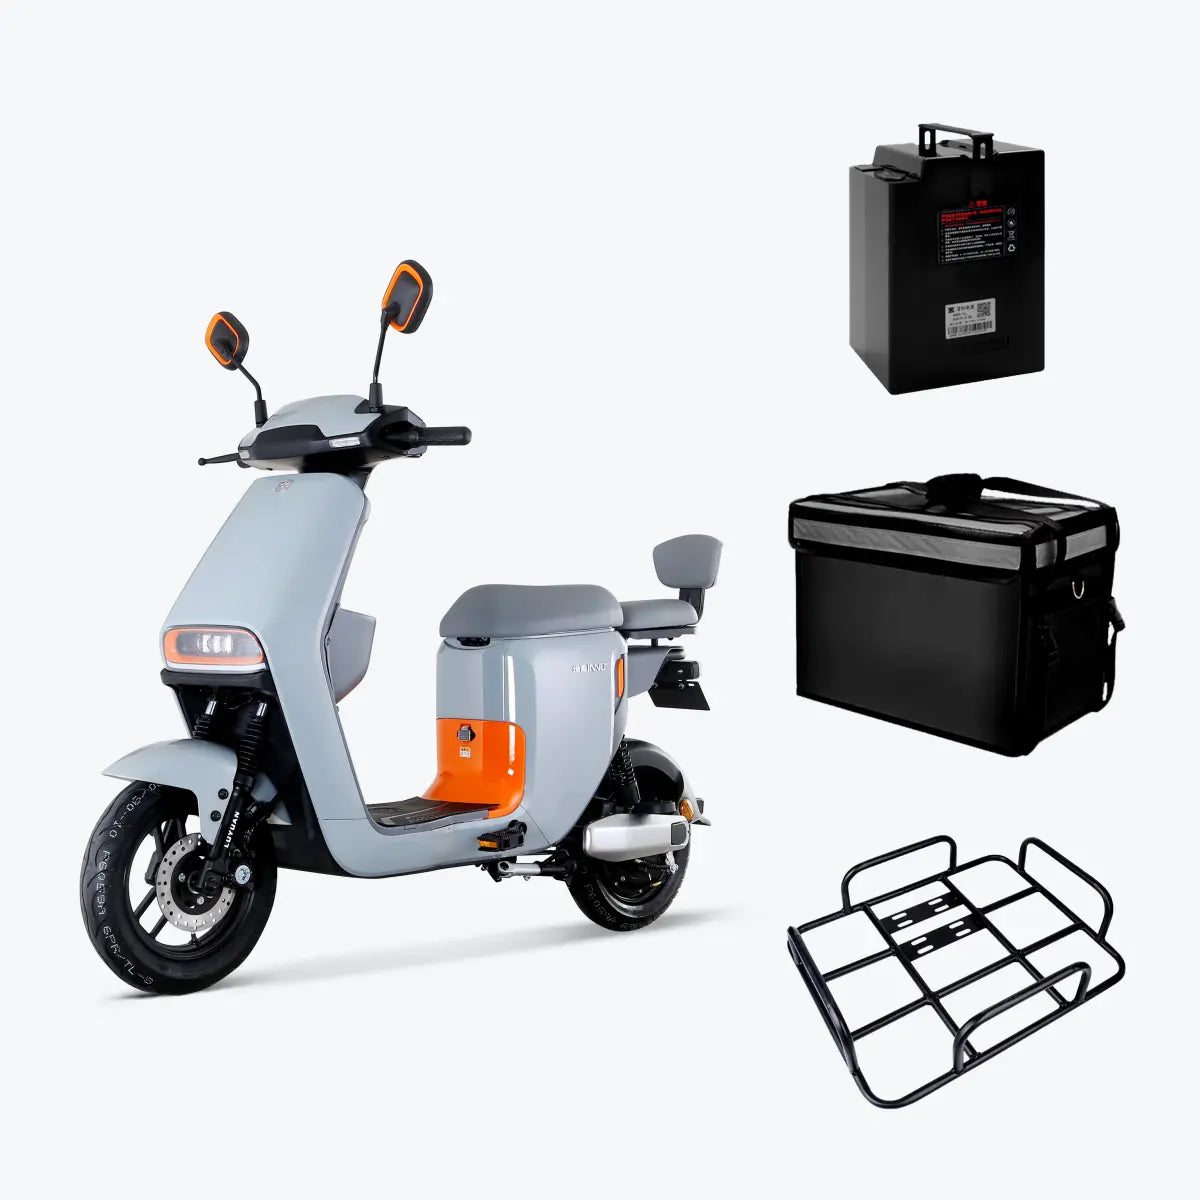 Delivery Moped style Class 2 E-bike Combo | INNO Class 2 Electric Bike + One Additional Battery + Rack + Takeaway Bag